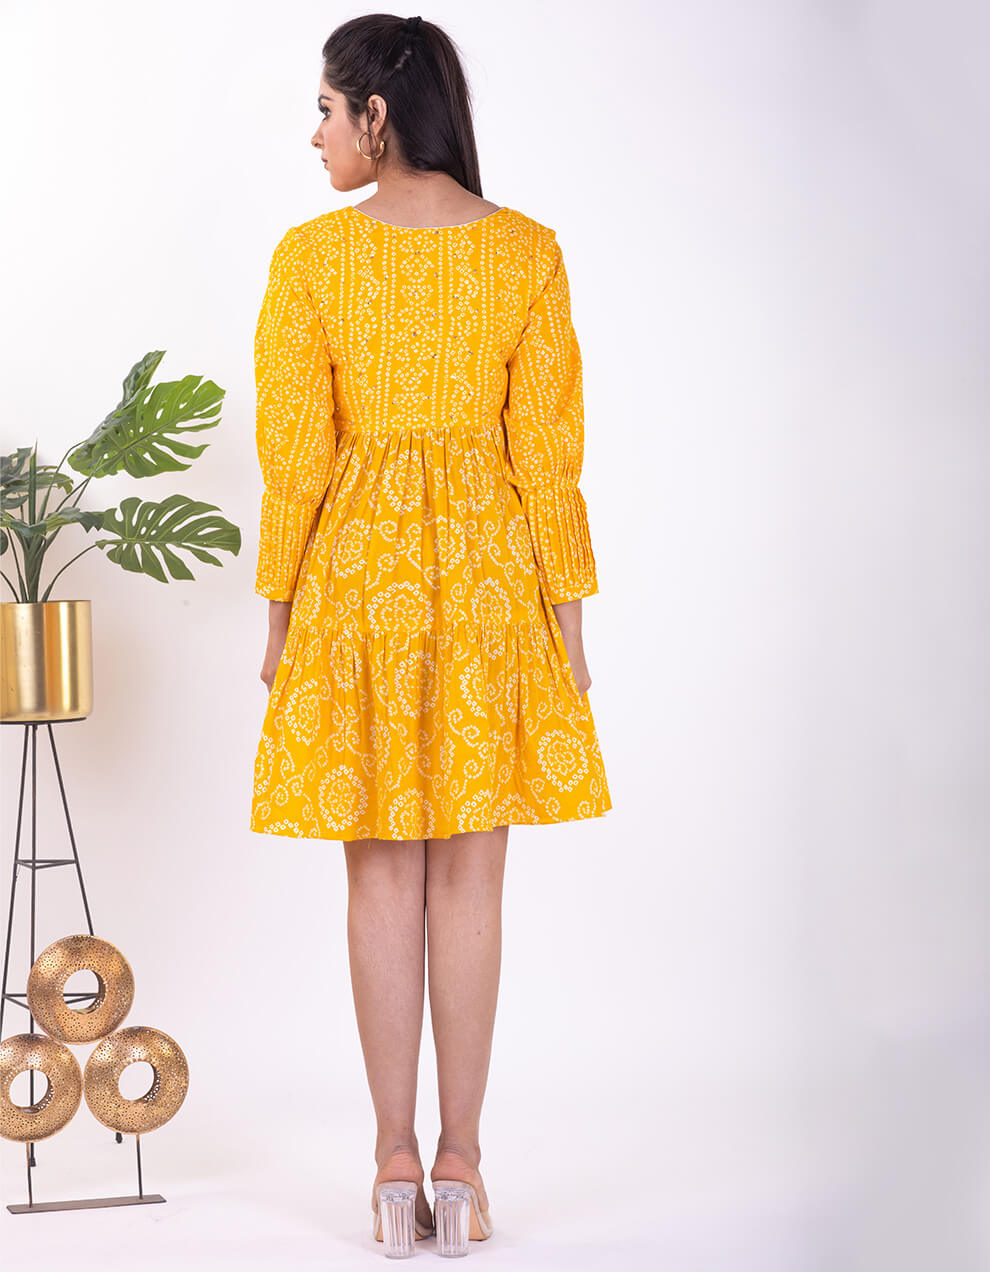 Get-brand-new-offers-on-Yellow-bandhani-cotton-kurta-designers-in-India-at-the-best-prices-2